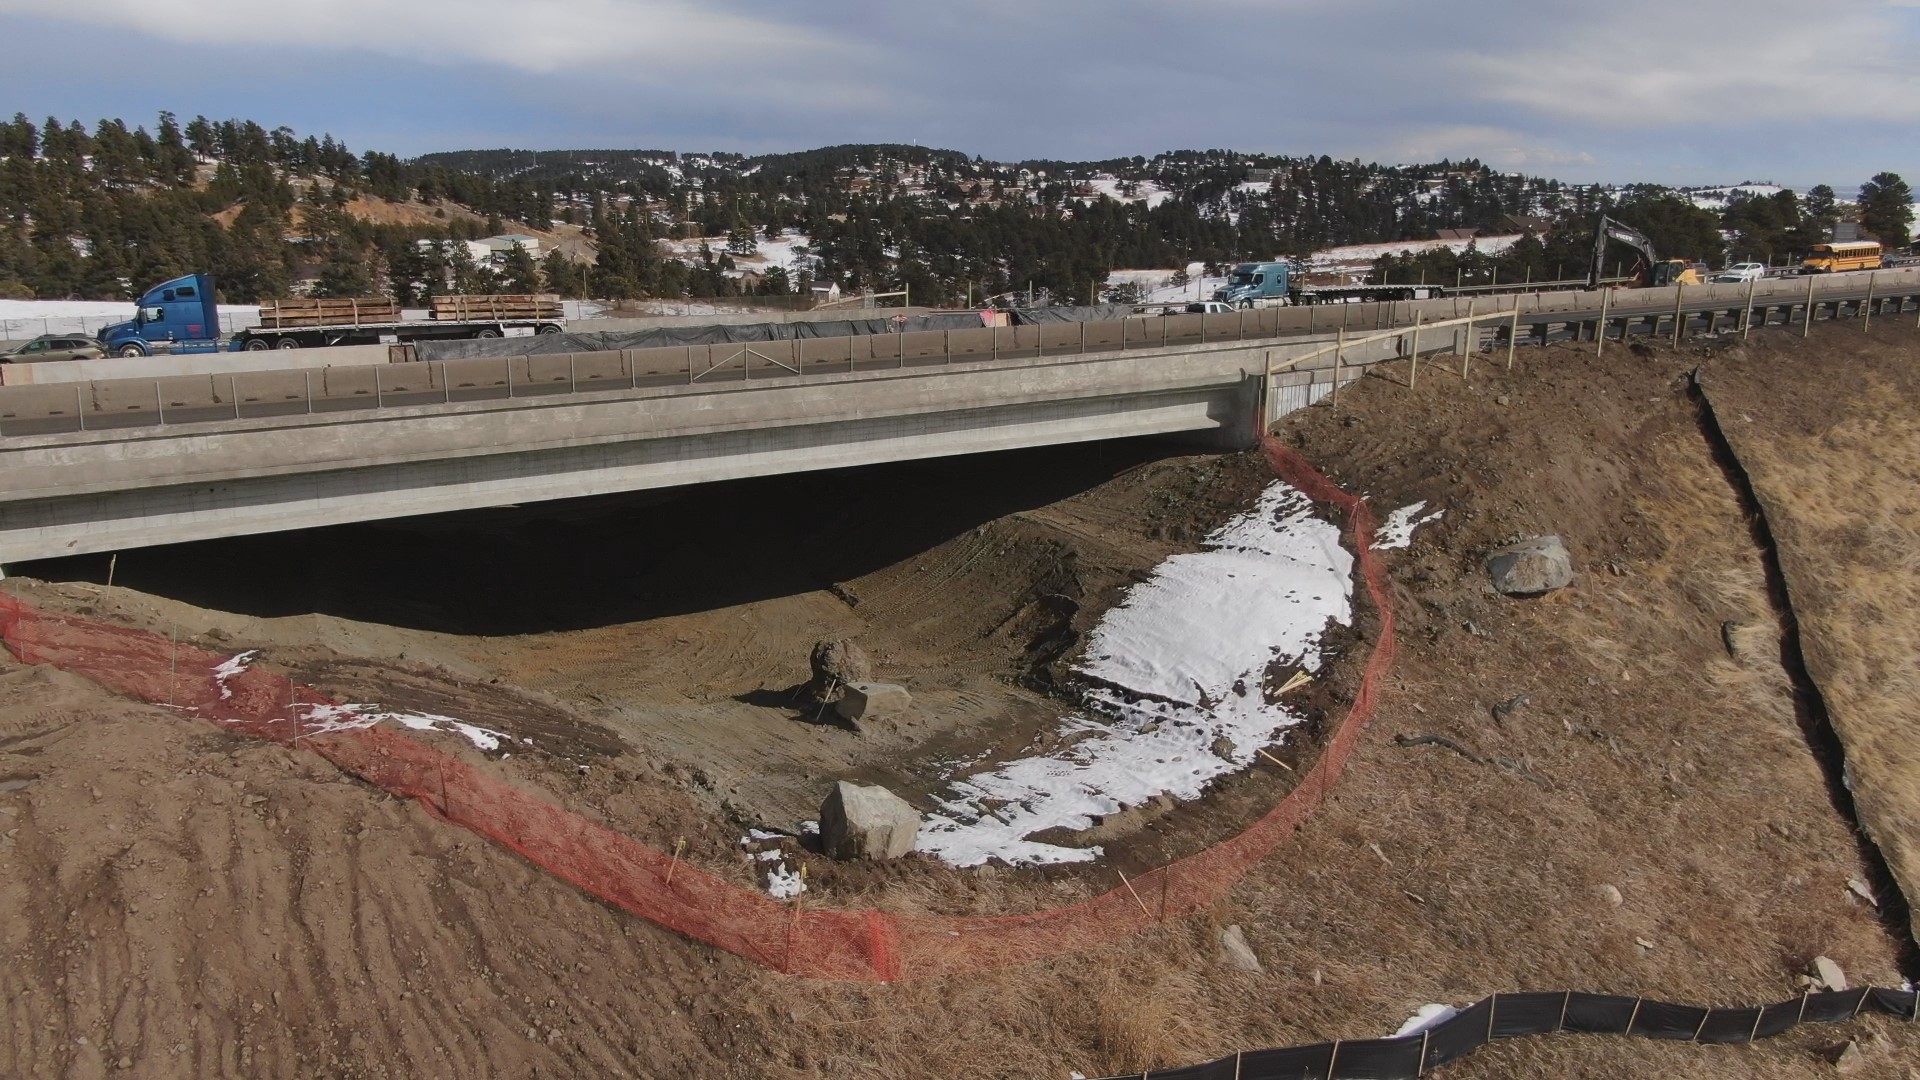 CDOT is nearing completion of the first wildlife underpass on the I-70 mountain corridor.